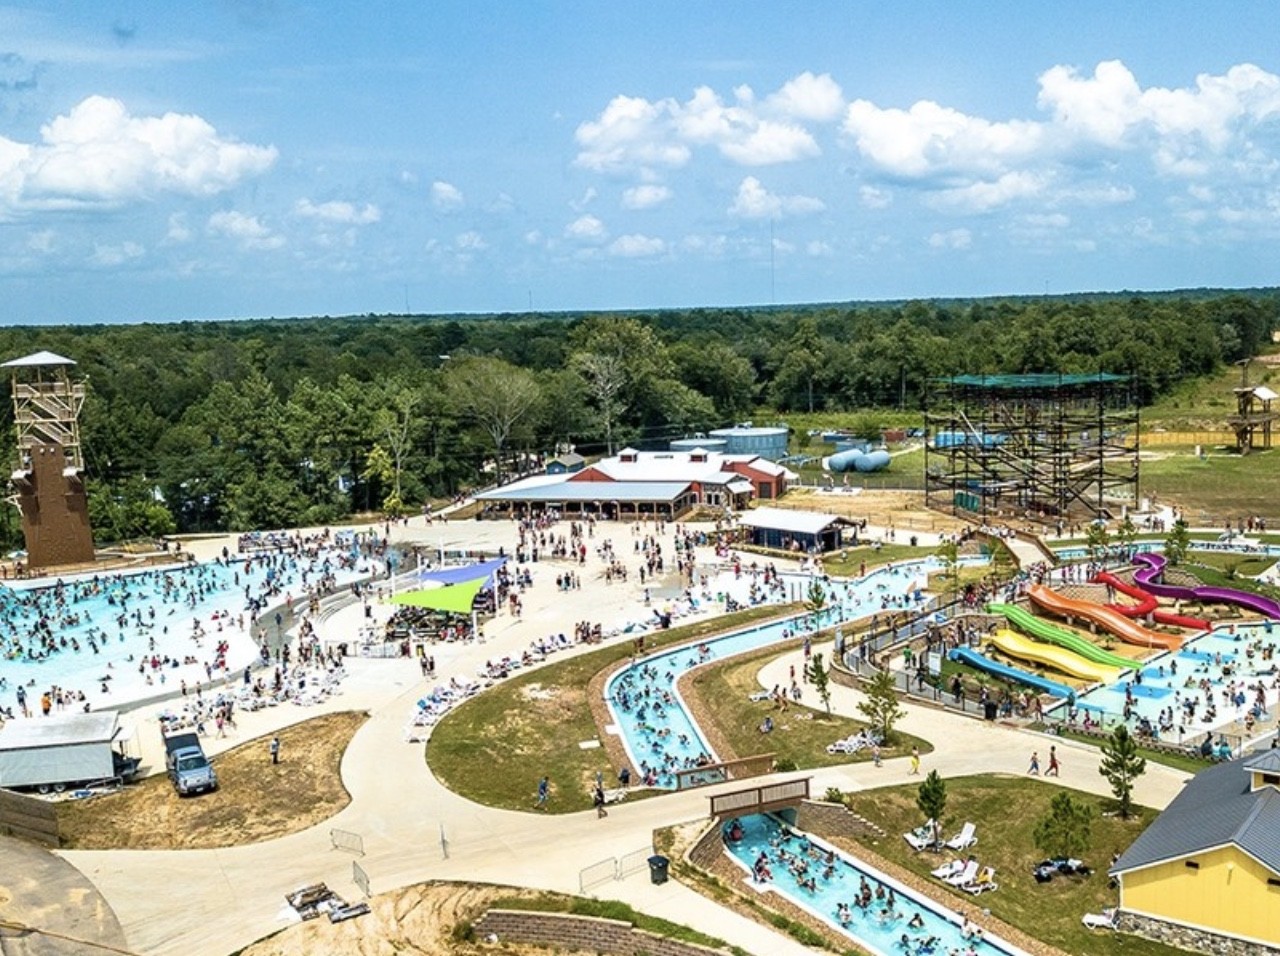 Big Rivers Waterpark
23101 TX-242, New Caney, (832) 509-1556, bigriverswaterpark.com
Over near Houston you’ll find Big Rivers. The park is home to the Houston area’s largest lazy river (appropriately titled the Rio GRAND River), plus water coasters, a wave pool and lots of slides that you can easily spend hours going up and down. Trust us, fun is waiting to be had here.